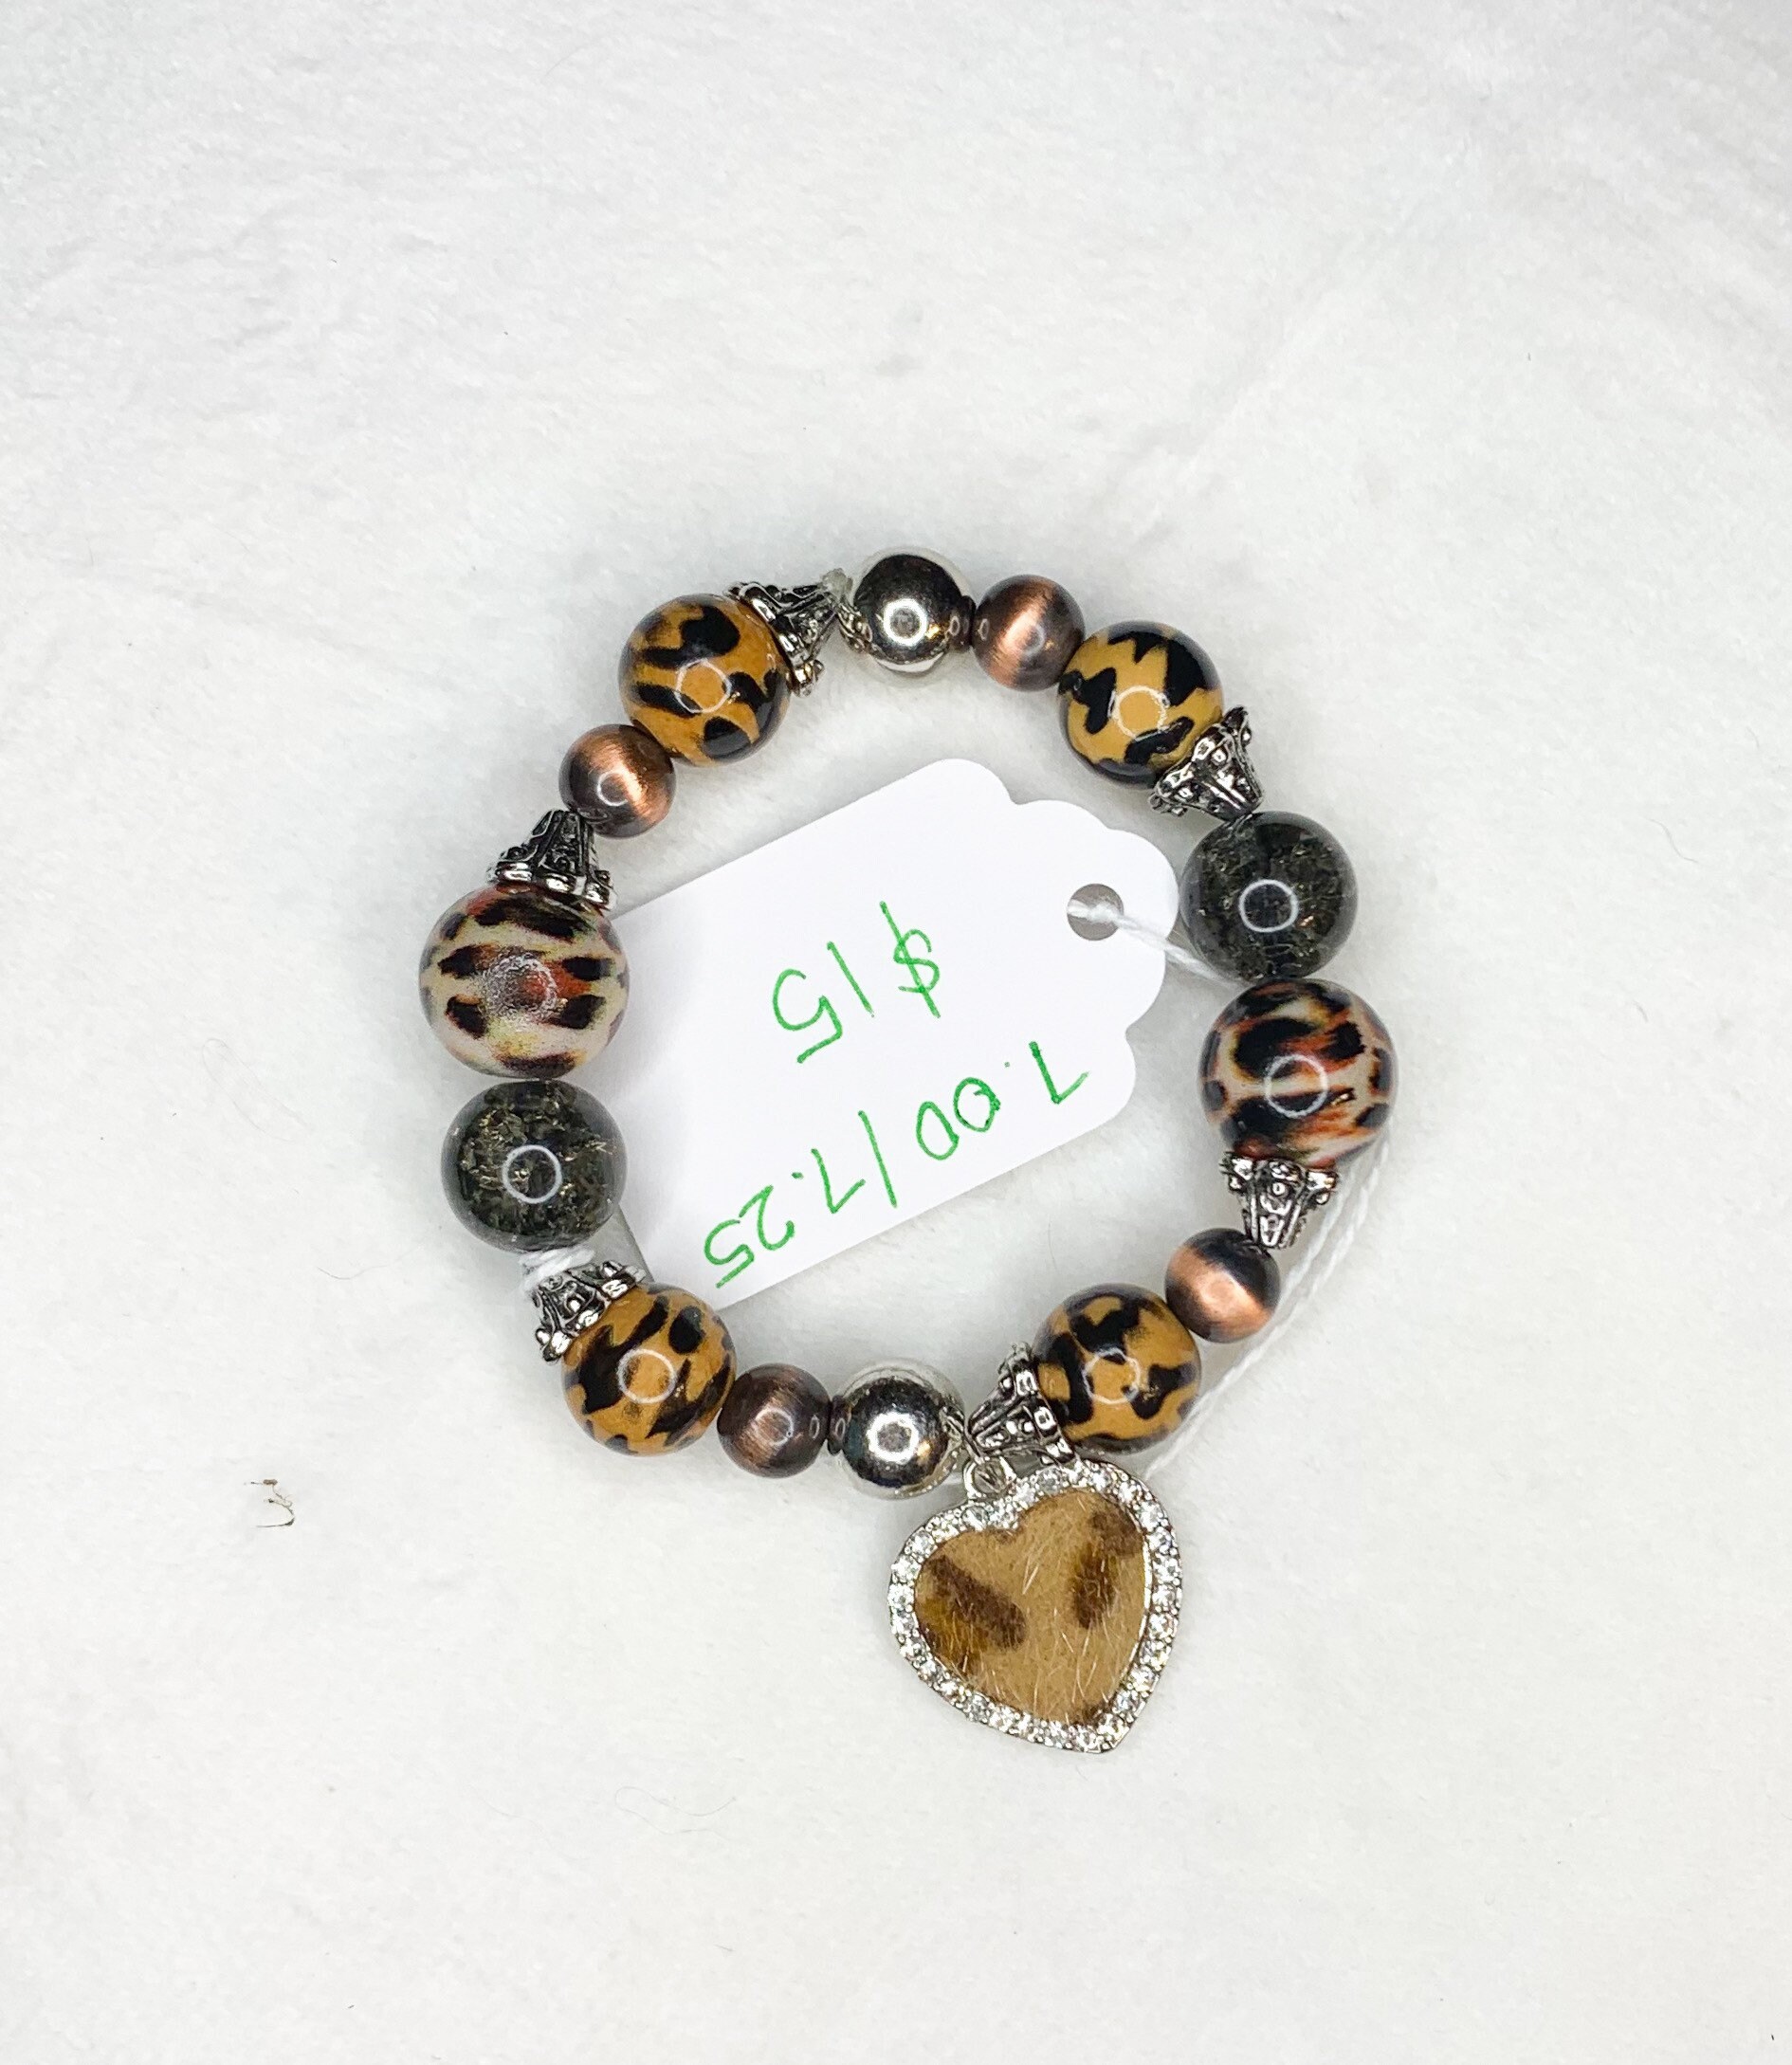 stretch bracelet with wood and plastic animal print beads